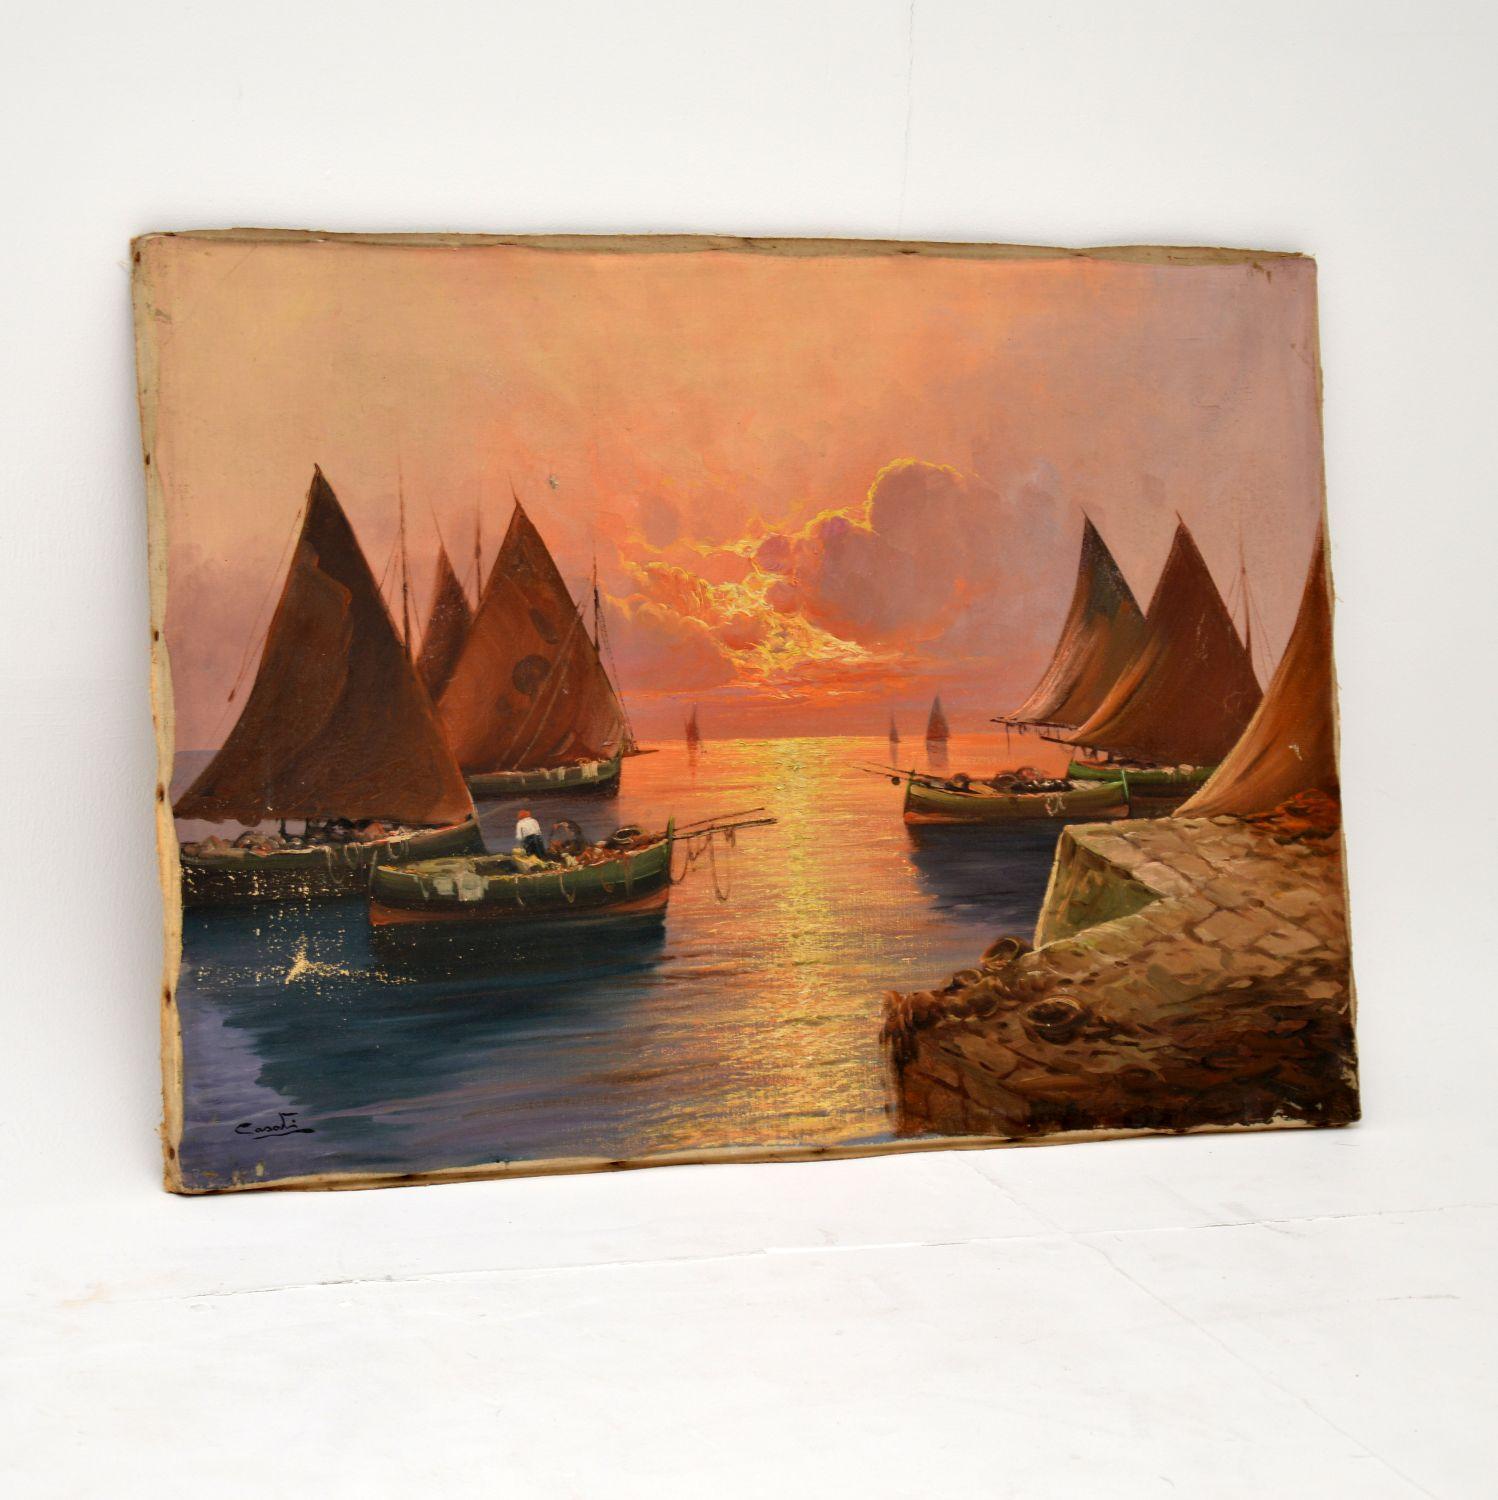 A beautiful antique oil painting on canvass, this is by the Italian artist Carlo Casati. It dates from the early 20th century, possibly 1920s-1930s.

It is beautifully executed and depicts a beautiful sunset, with lovely warm colors. This is